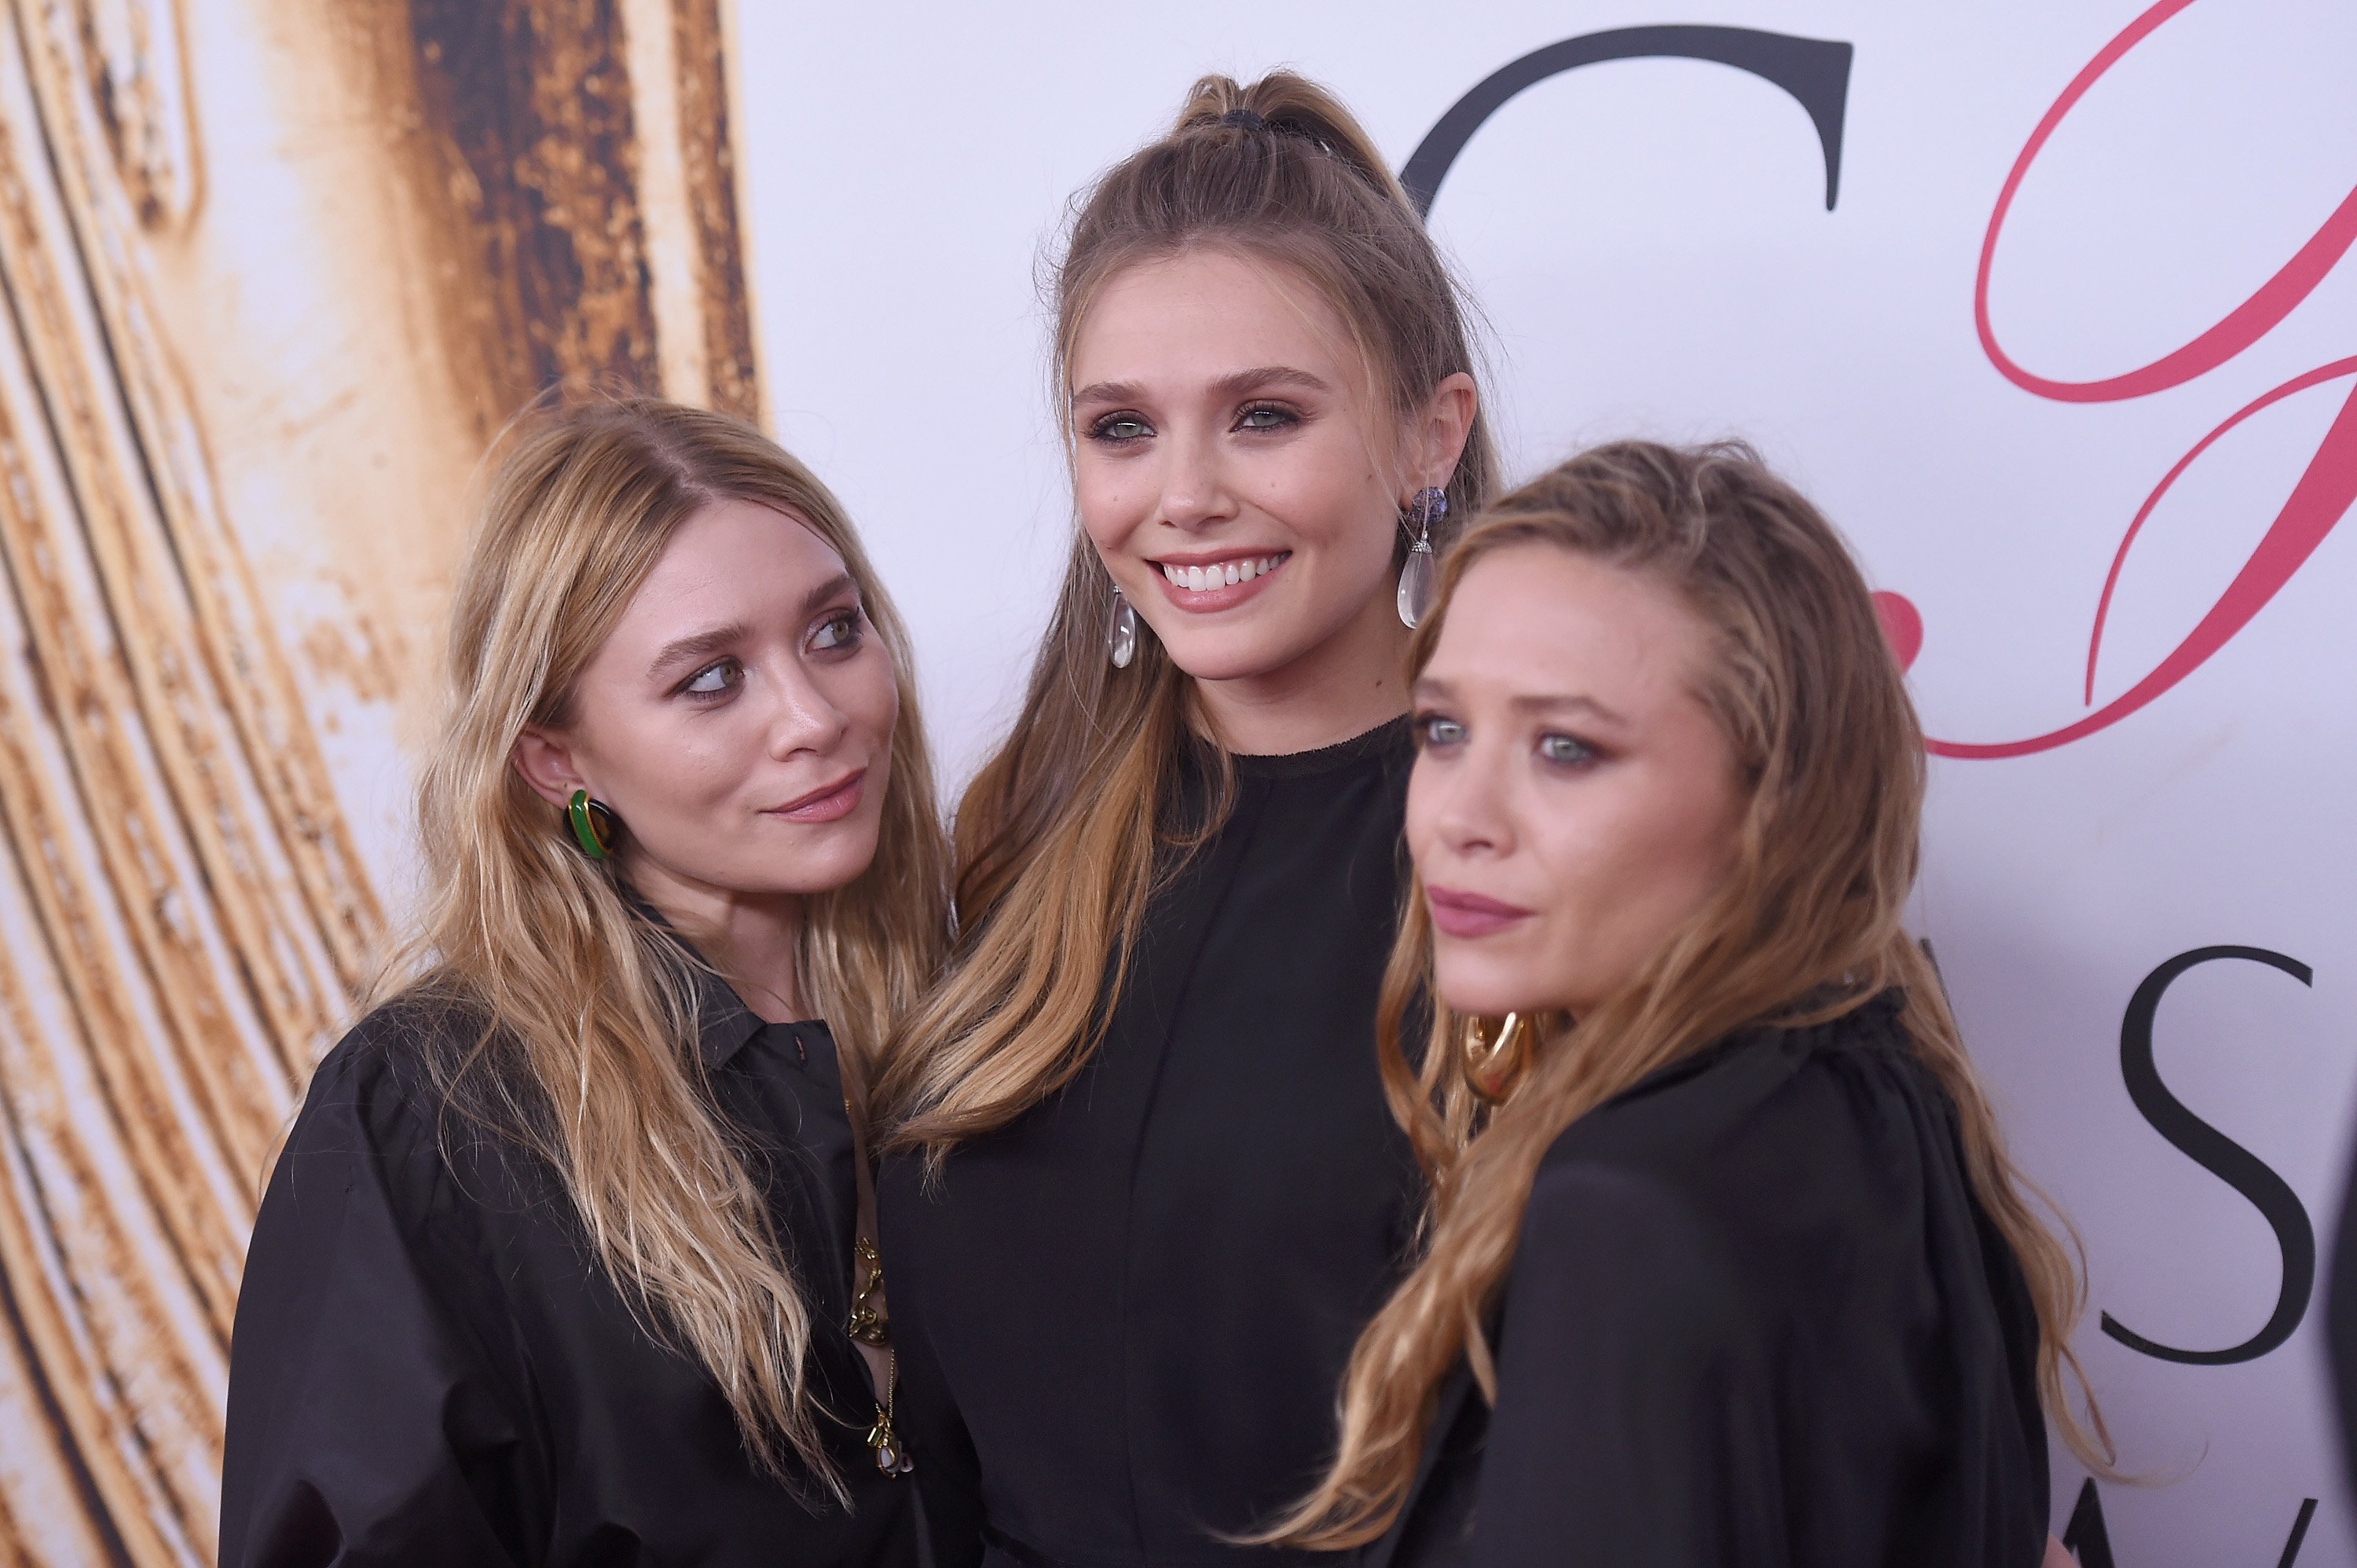  Elizabeth Olsen, Mary-Kate and Ashley Olsen attend the 2016 CFDA Fashion Awards at the Hammerstein Ballroom on June 6, 2016 in New York City | Source: Getty Images